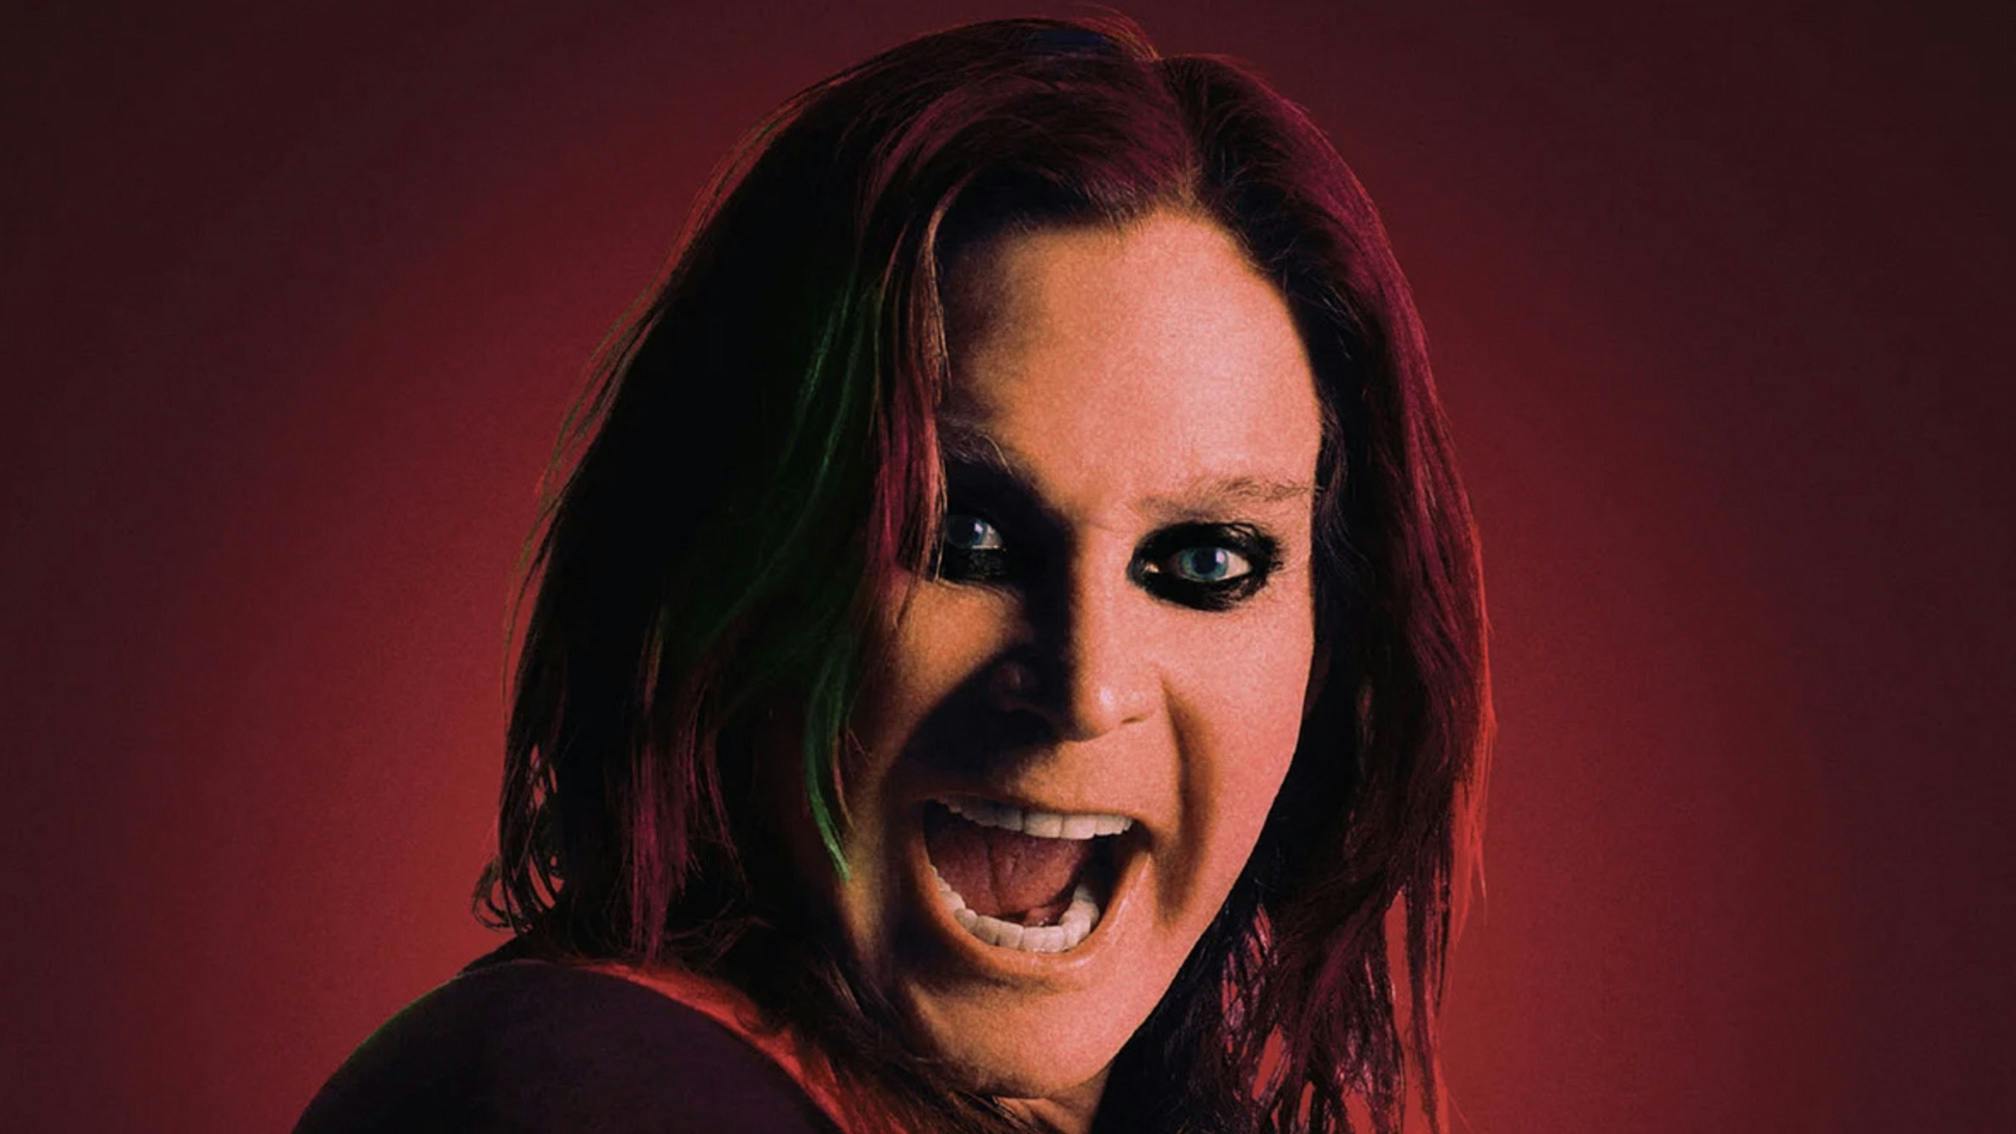 Ozzy Osbourne has 13 or 14 "really strong songs" for next solo album